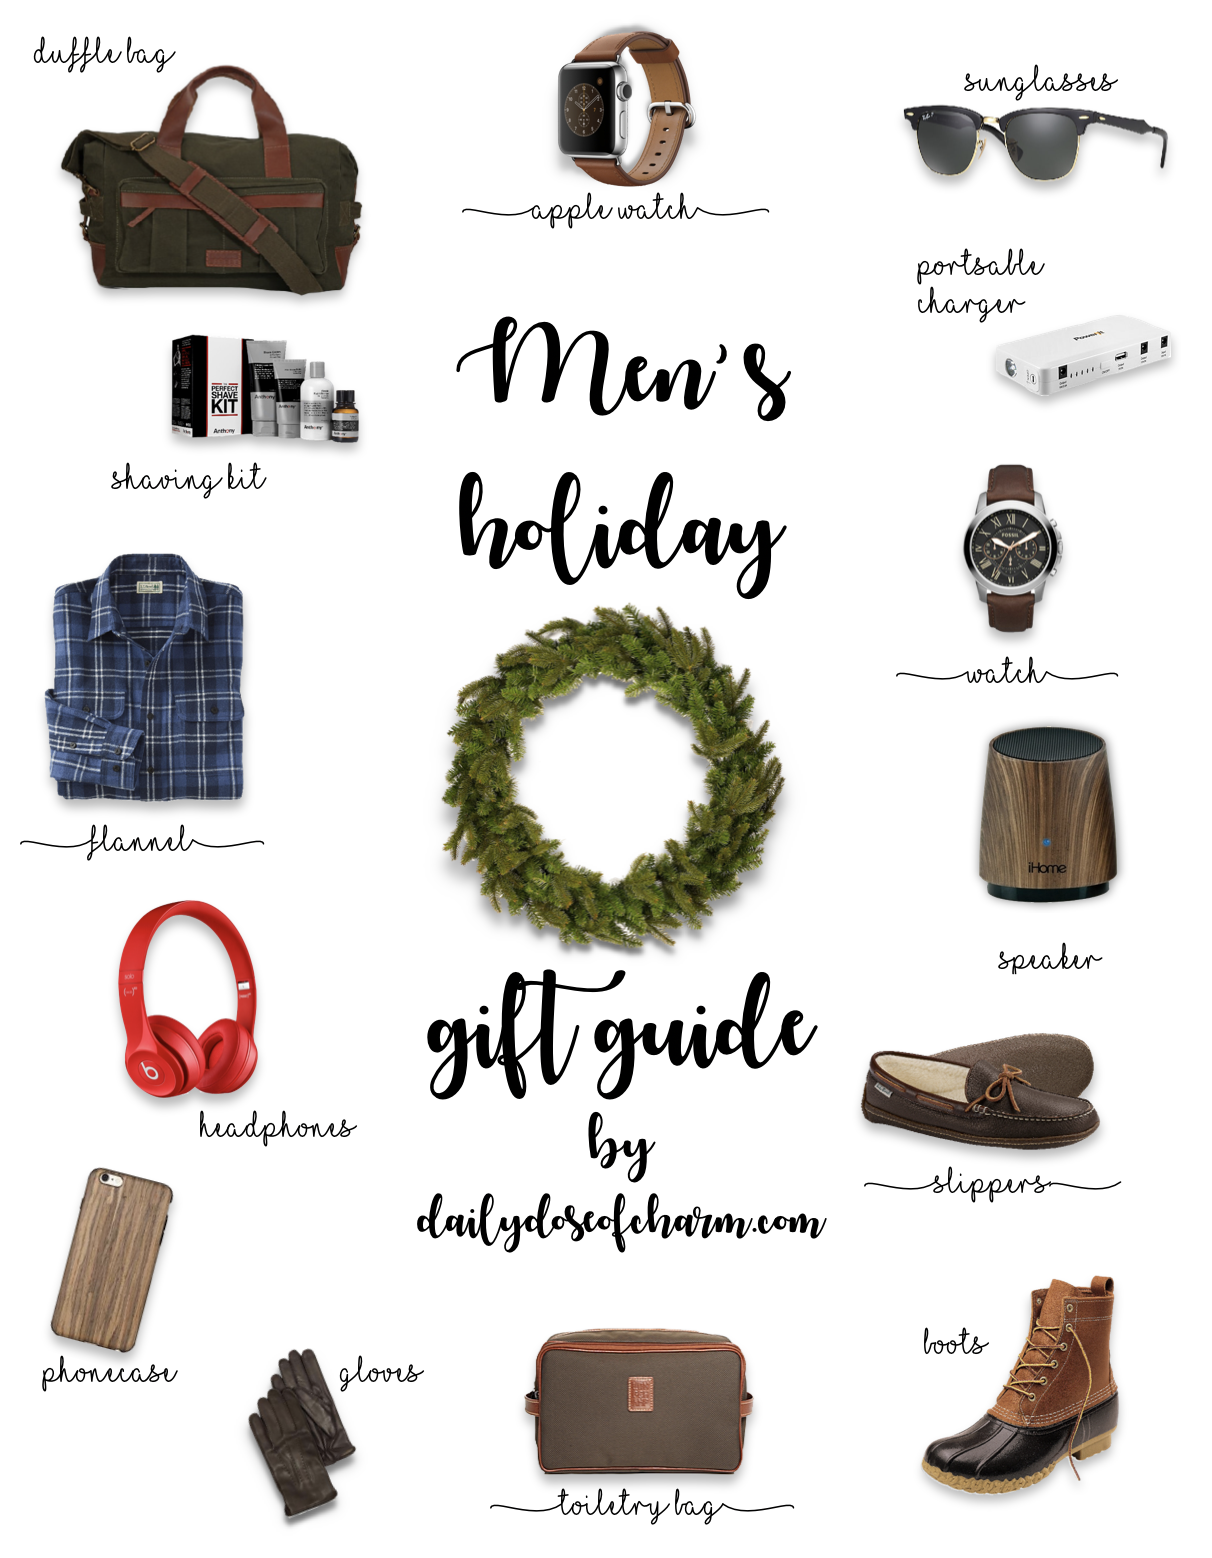 Ultimate holiday gift guide for him and her, a lot of ideas with different price ranges, check it out on dailydoseofcharm.com by Lauren Lindmark on daily dose of charm